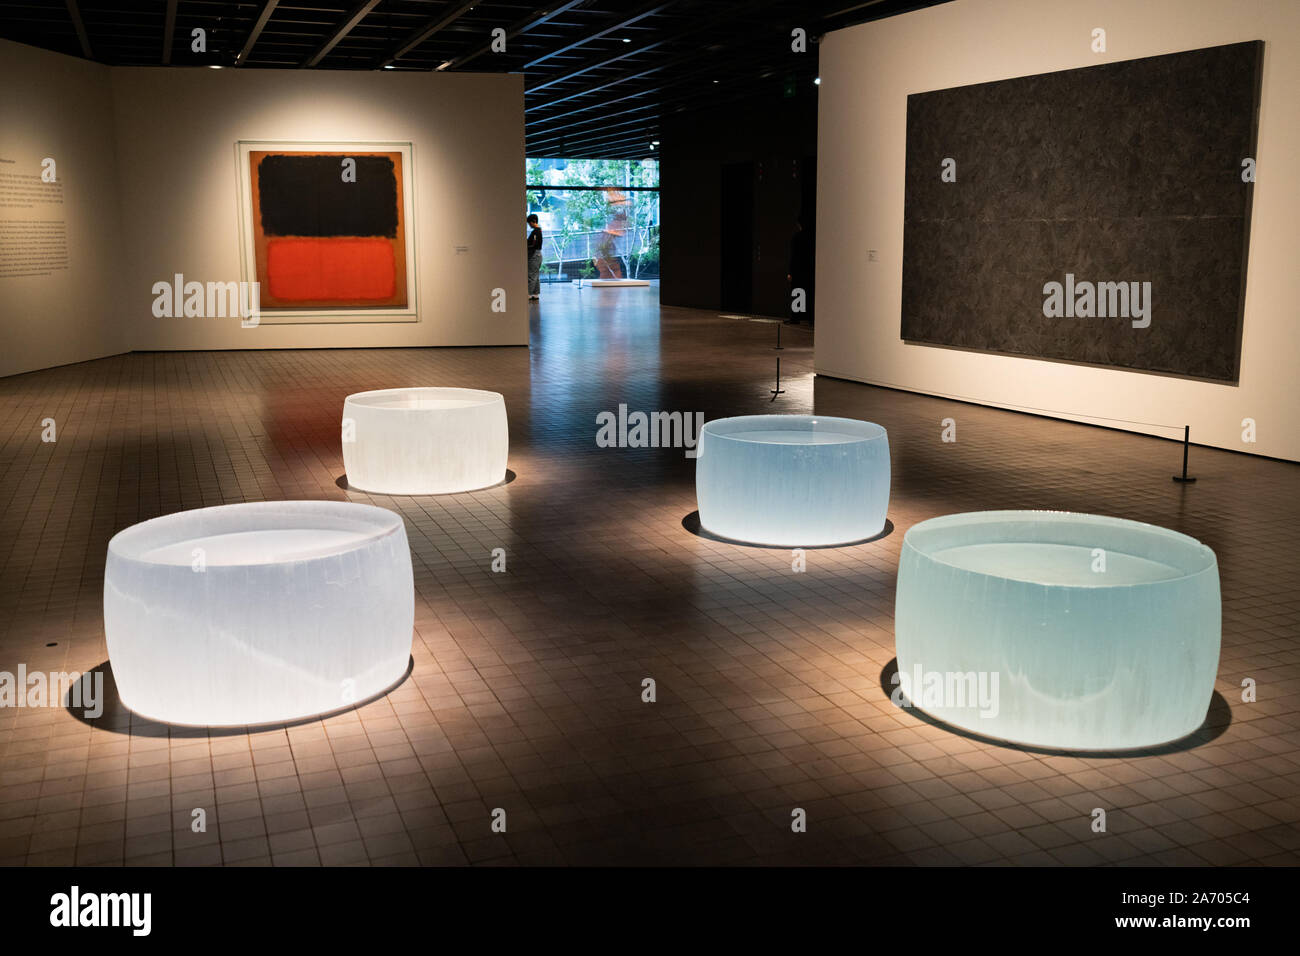 Seoul Korea , 22 September 2019 : Leeum Samsung Museum of Art interior view with Ten liquids incidents sculpture by American artist Roni Horn in Seoul Stock Photo